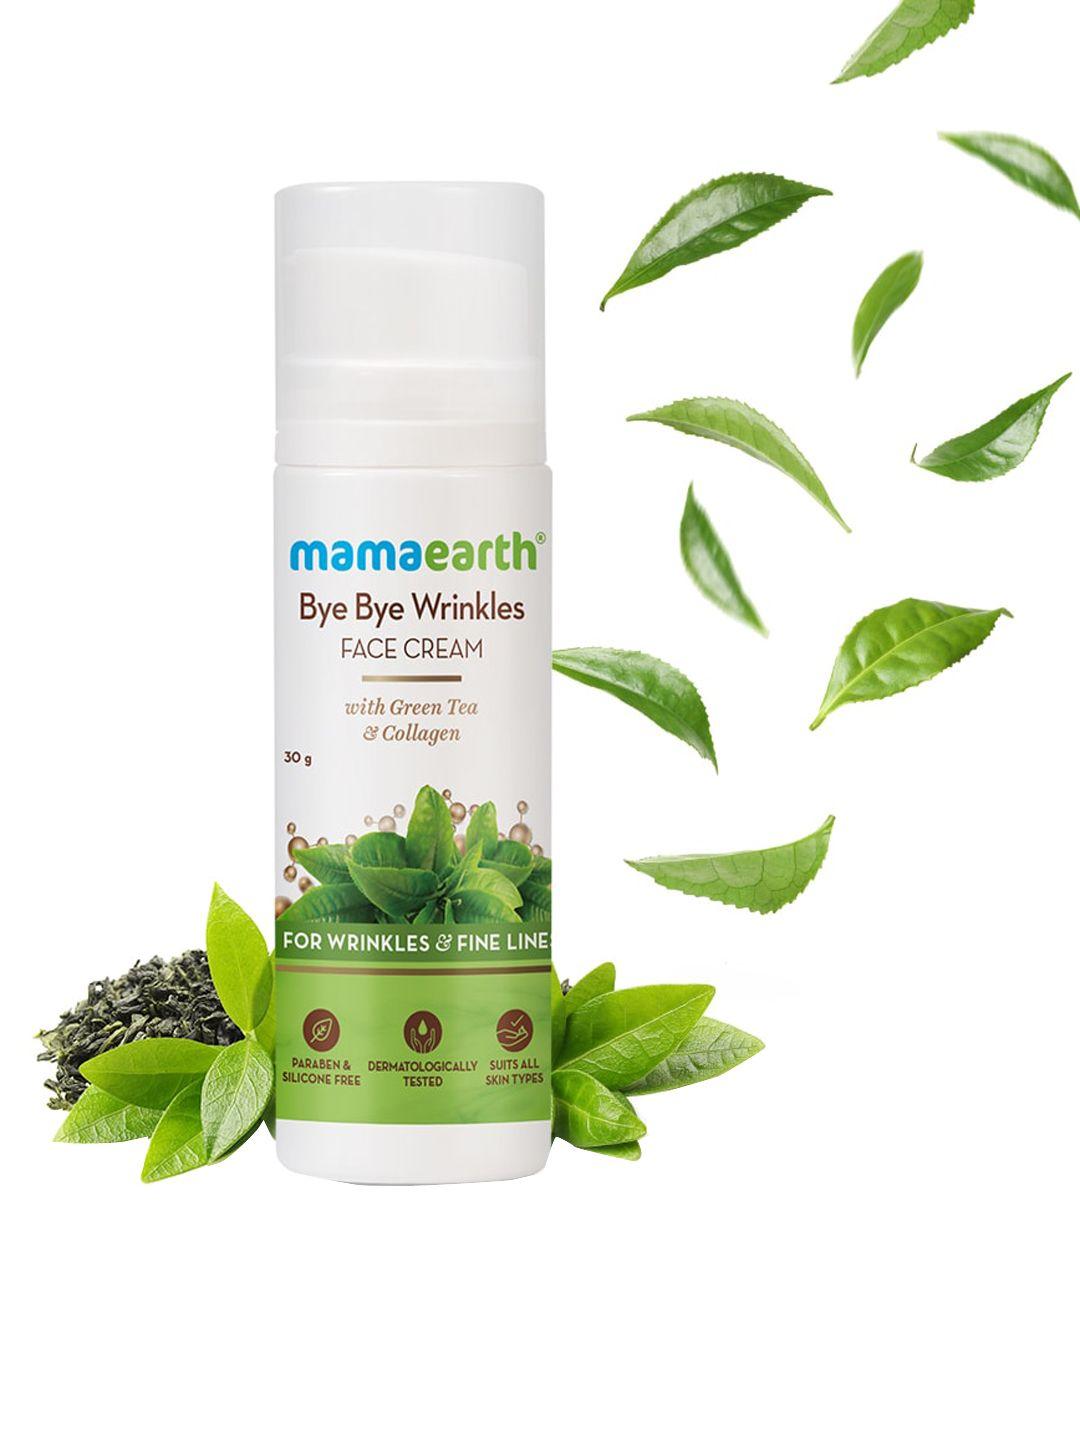 mamaearth bye bye wrinkles face cream with green tea & collagen - 30 g